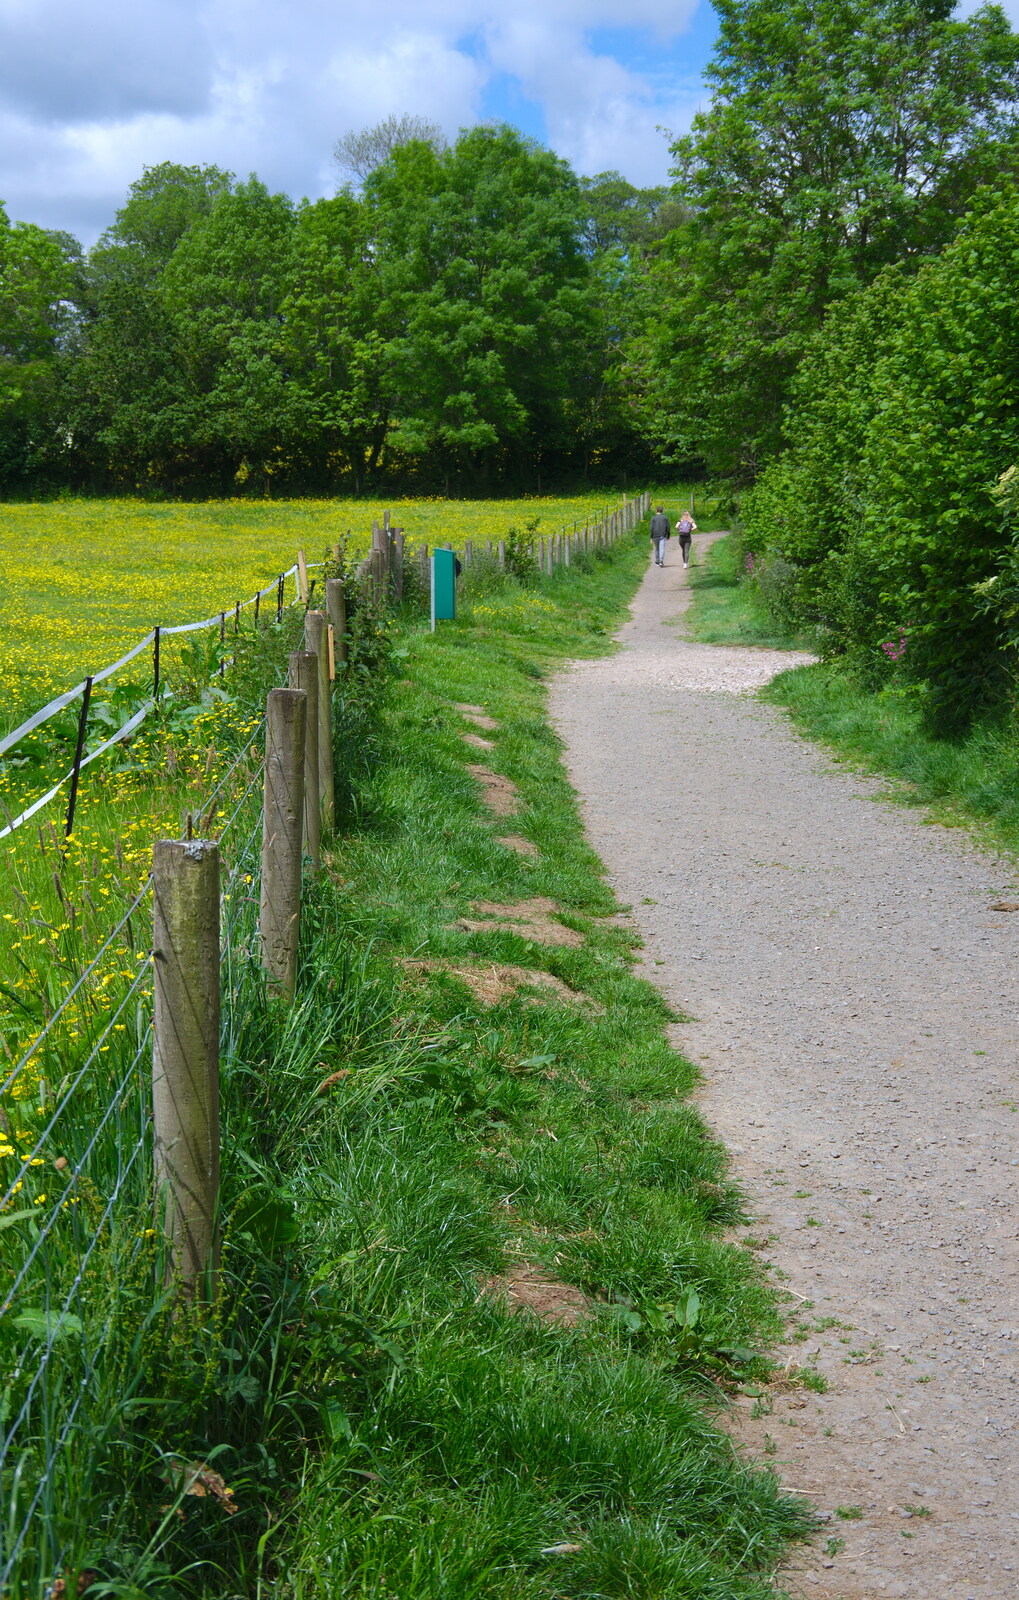 A nice path from Chagford Lido and a Trip to Parke, Bovey Tracey, Devon - 25th May 2019